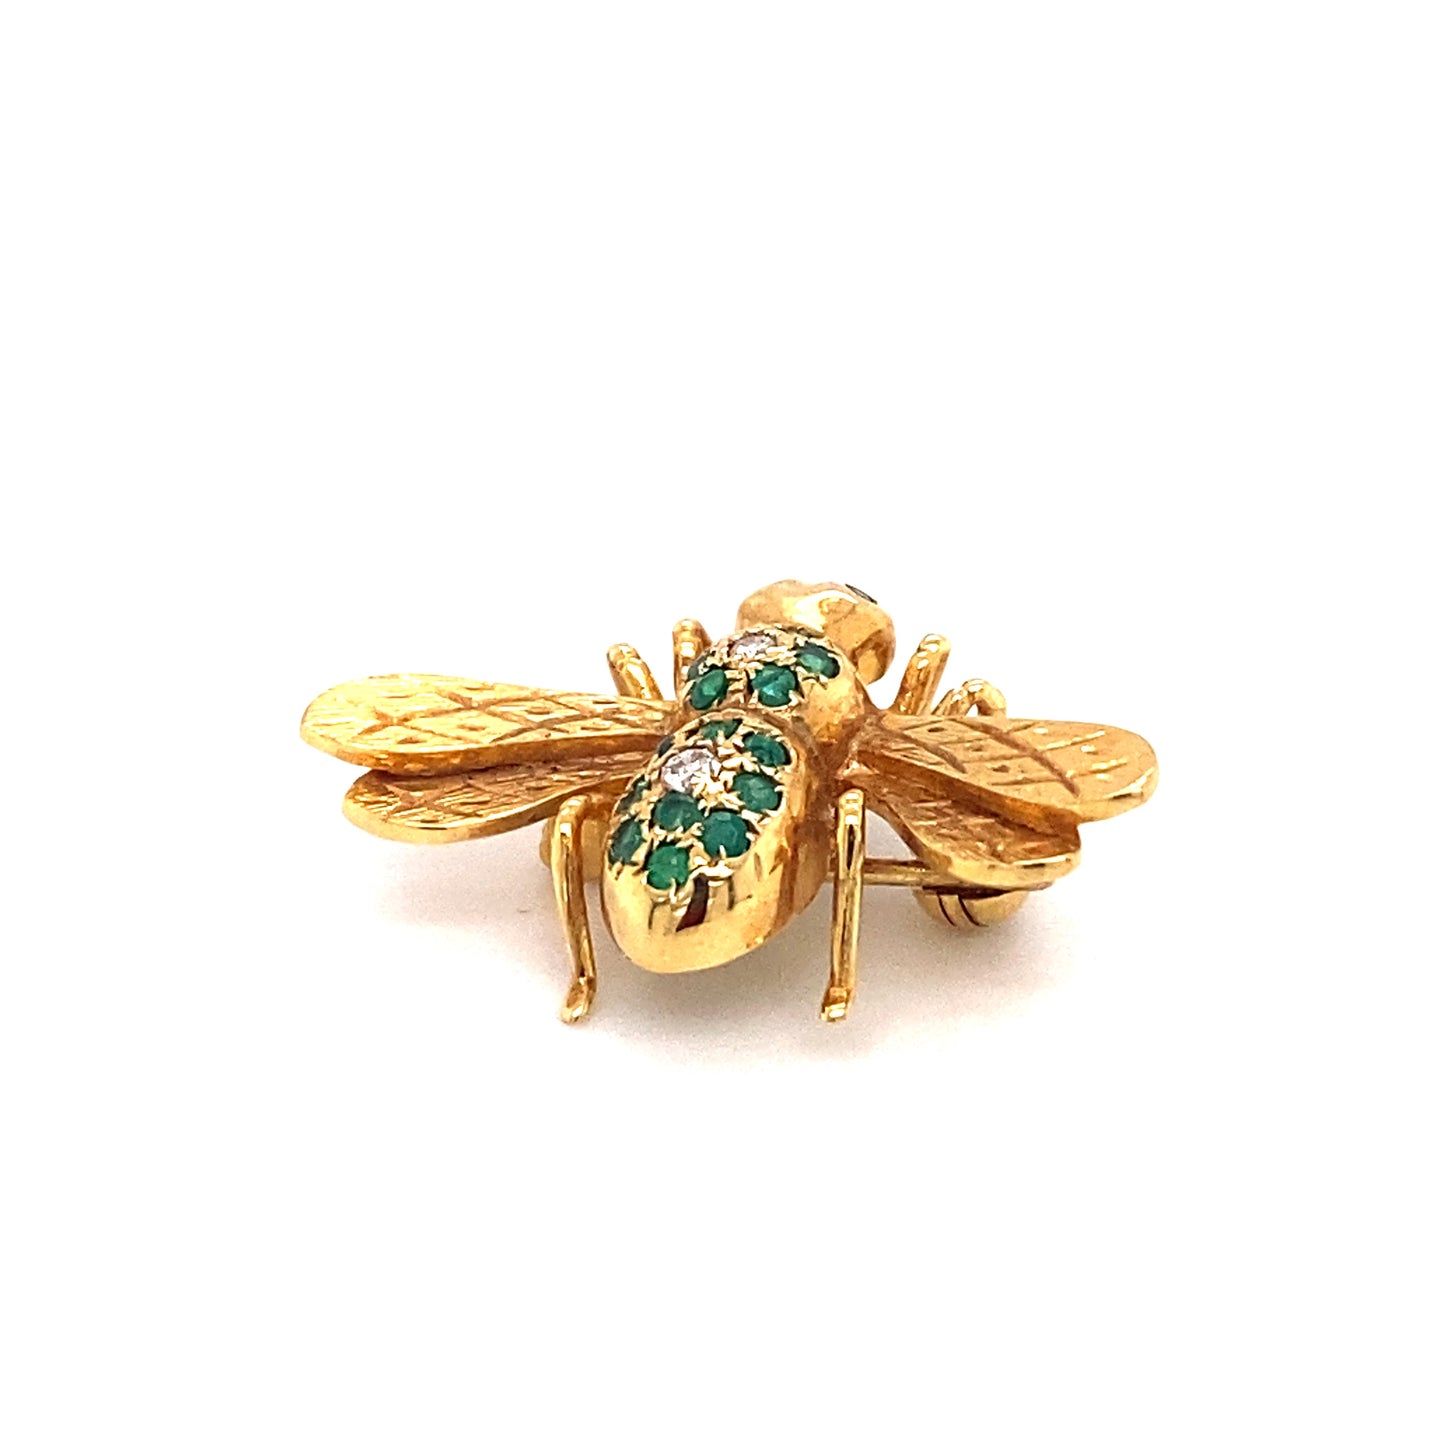 Circa 1960s Emerald and Diamond Insect Pin in 14K Gold